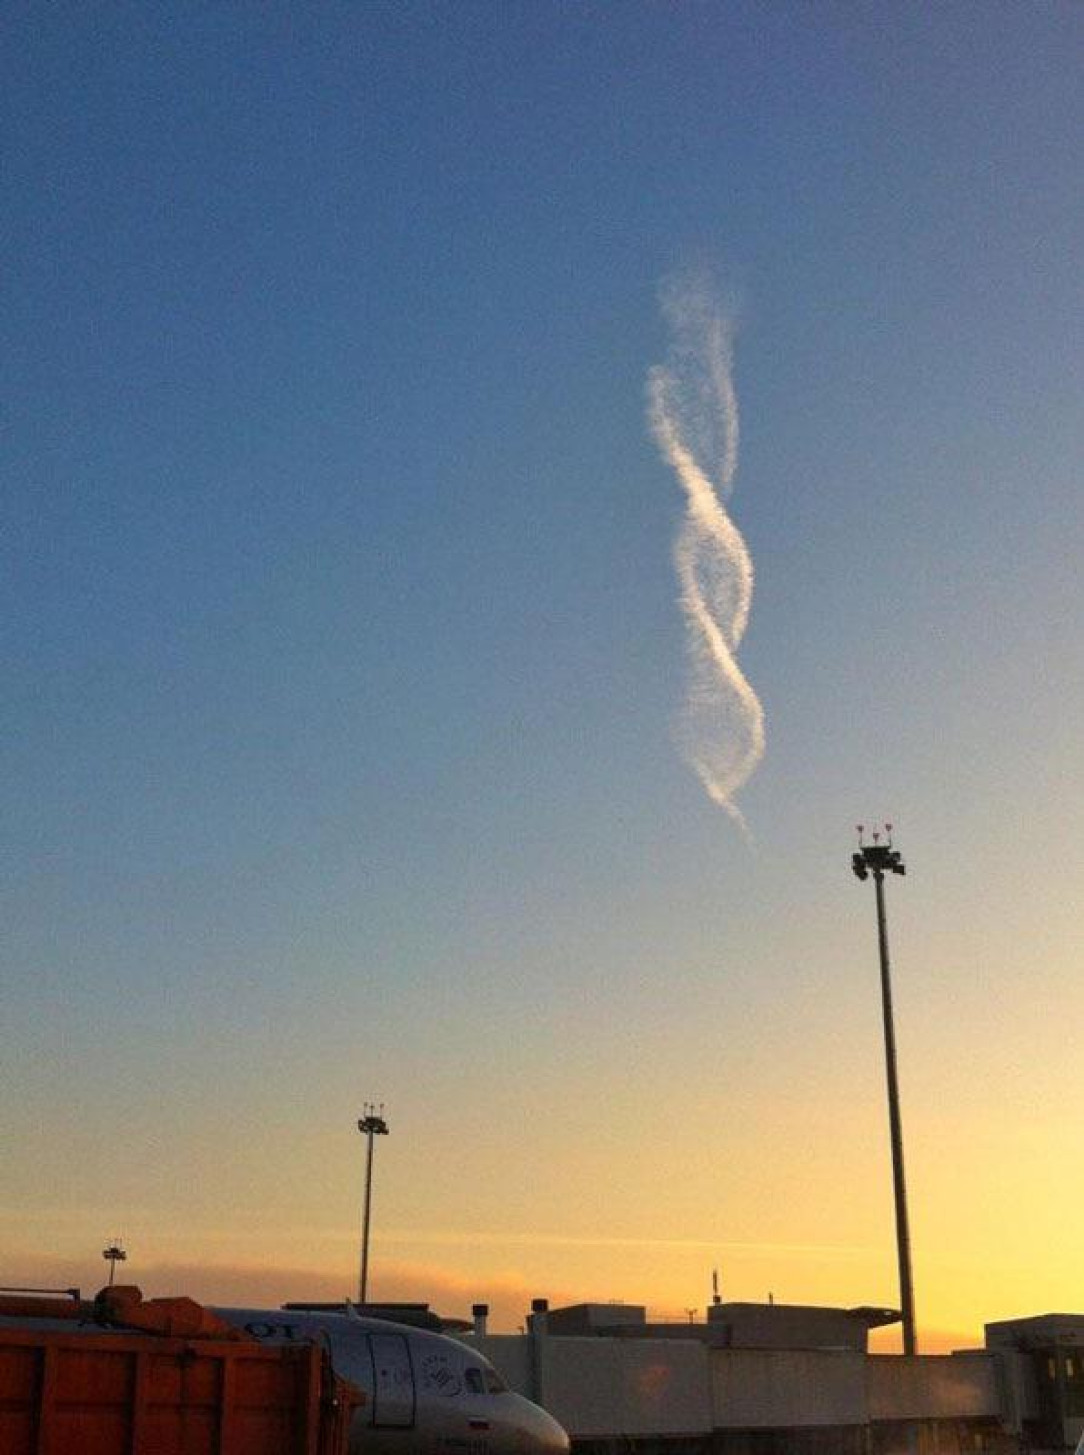 This double-helix shaped cloud in the sky